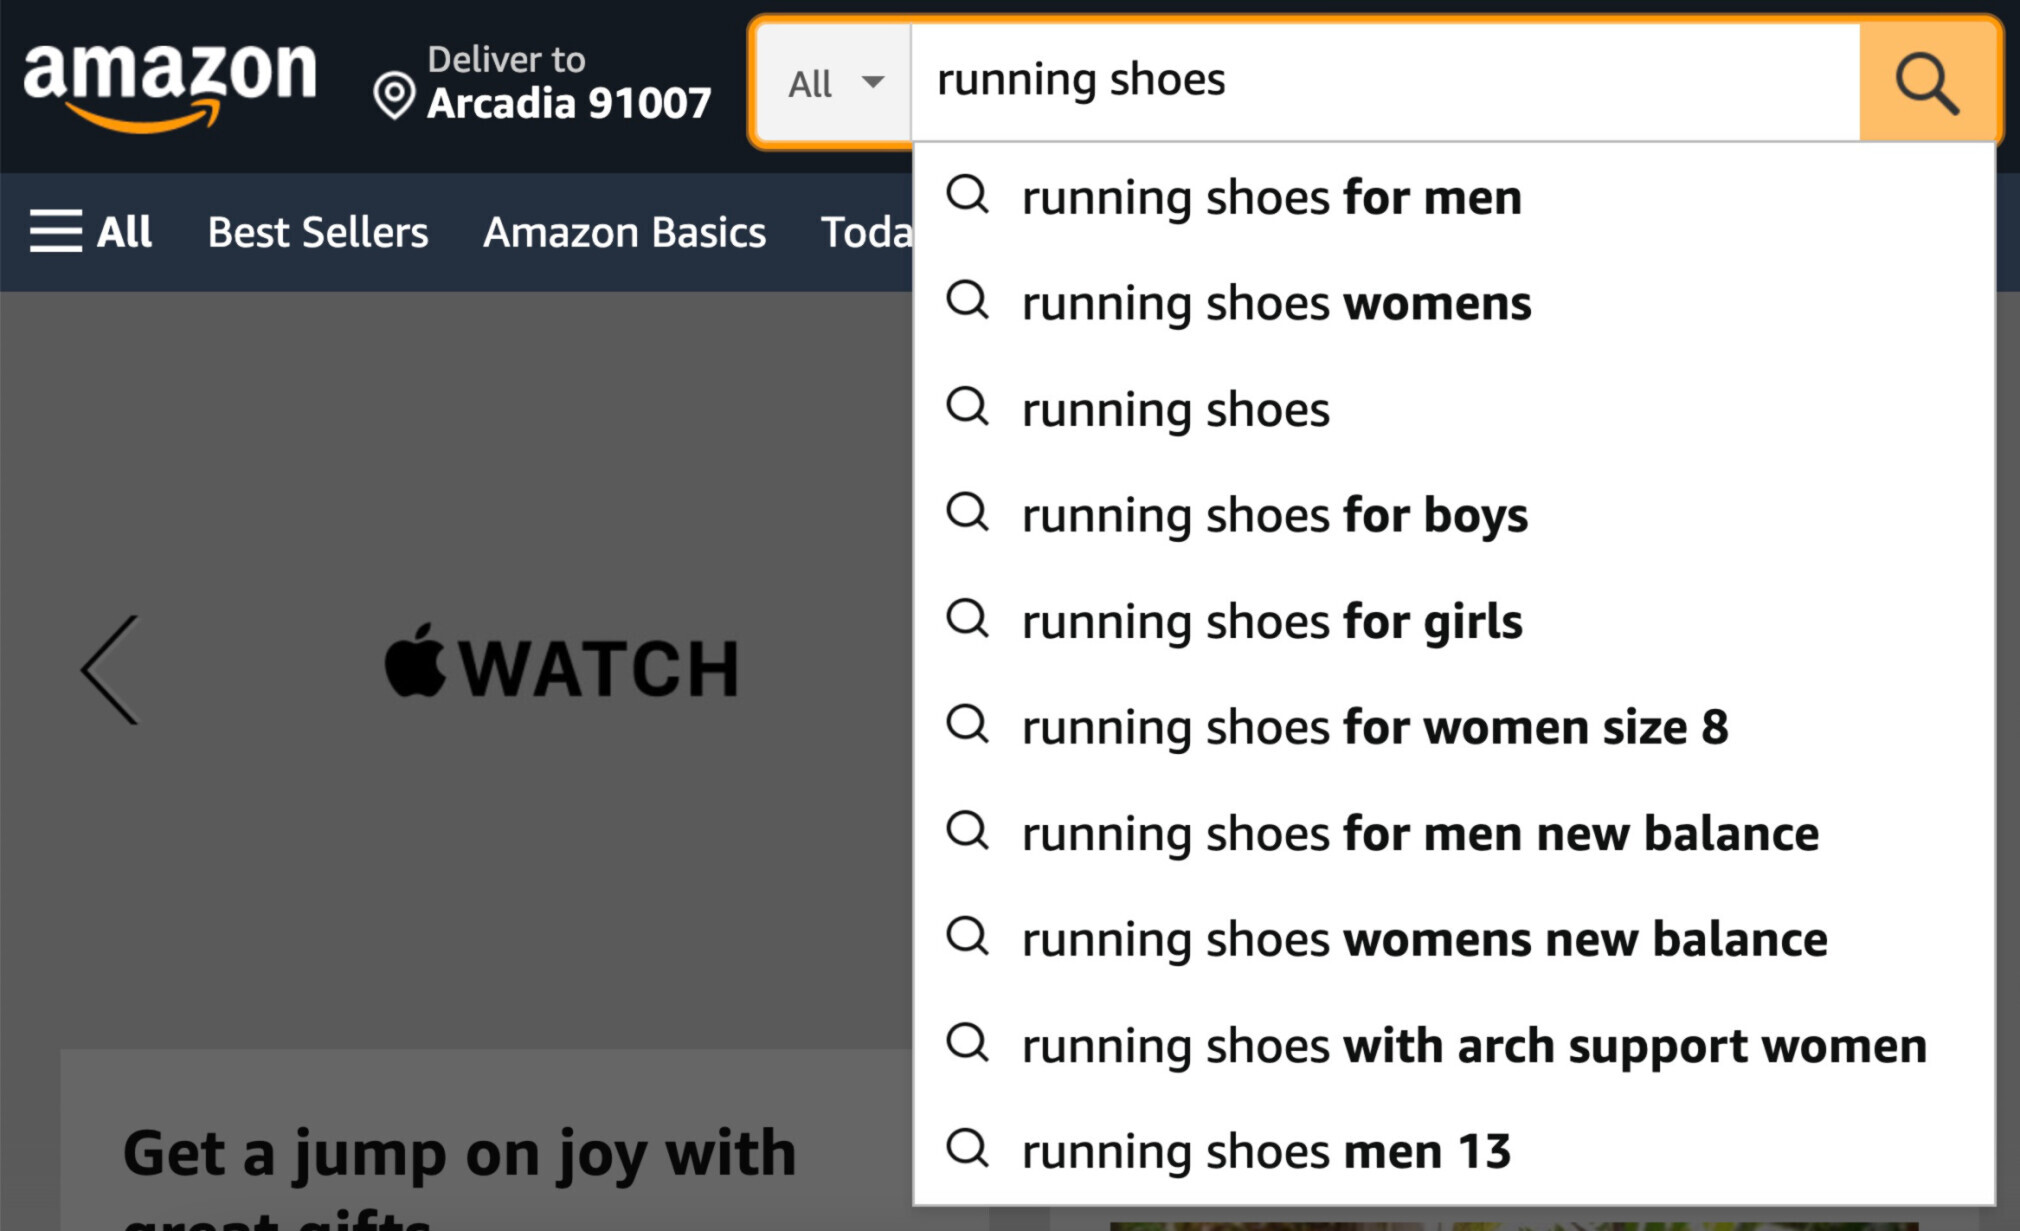 Amazon search suggestions for the keyword "running shoes"